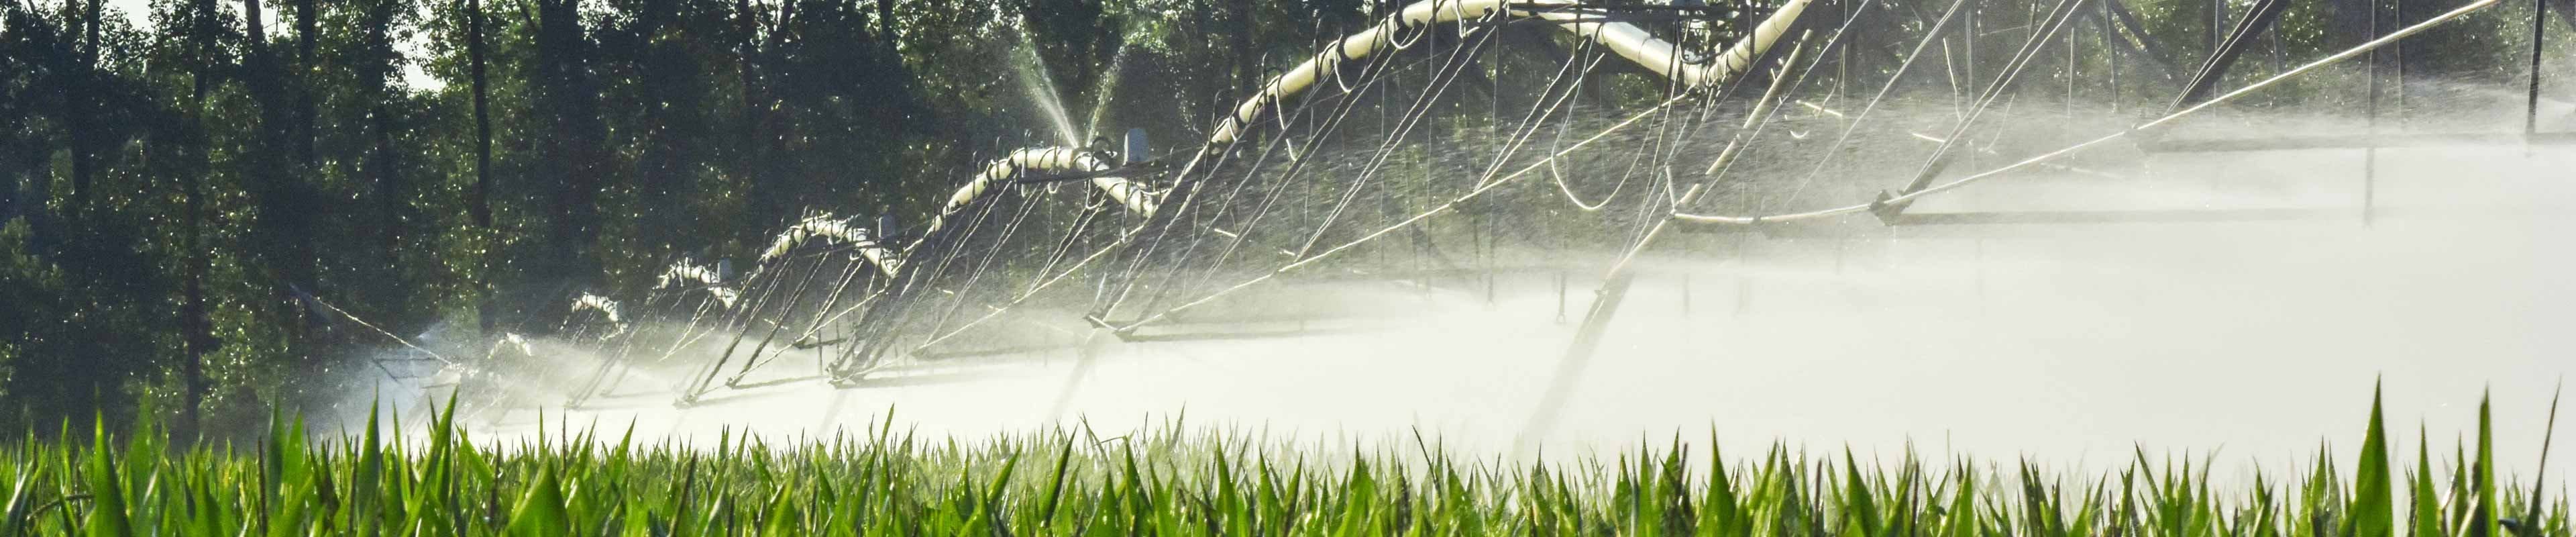 Image of an irrigation system watering crops.